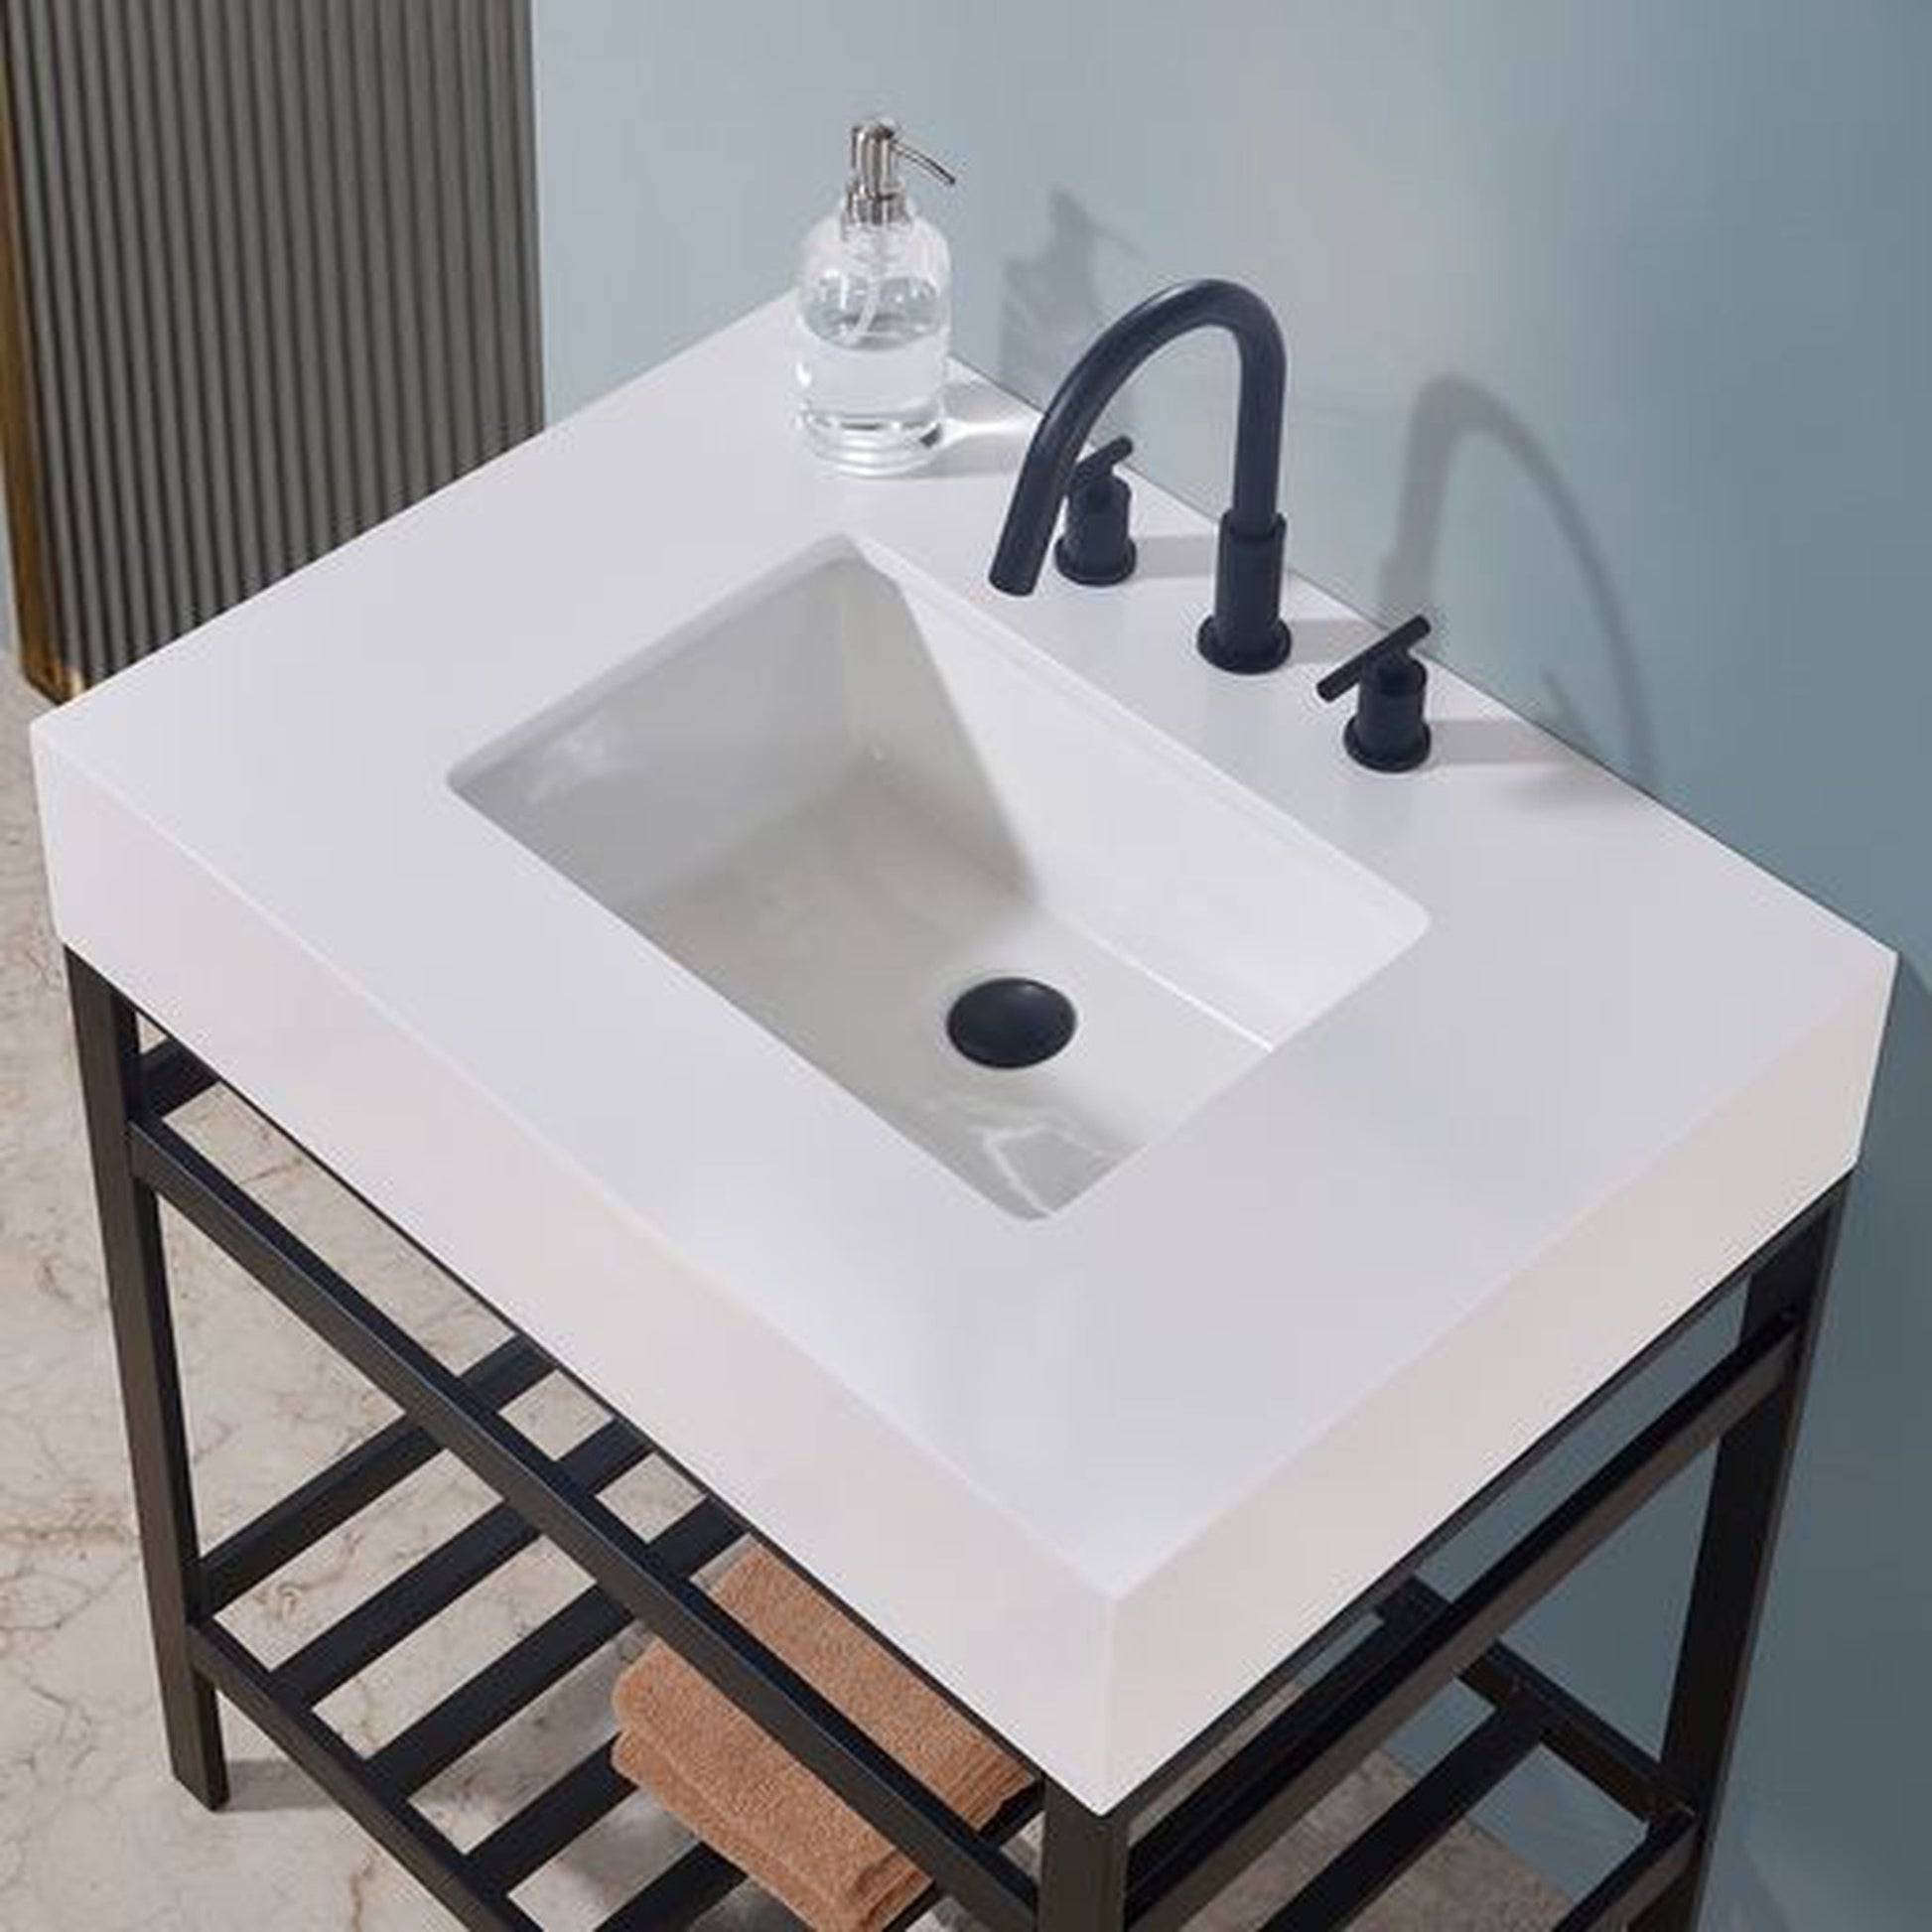 Altair Edolo 30" Matte Black Single Stainless Steel Bathroom Vanity Set Console With Mirror, Snow White Stone Top, Single Rectangular Undermount Ceramic Sink, and Safety Overflow Hole